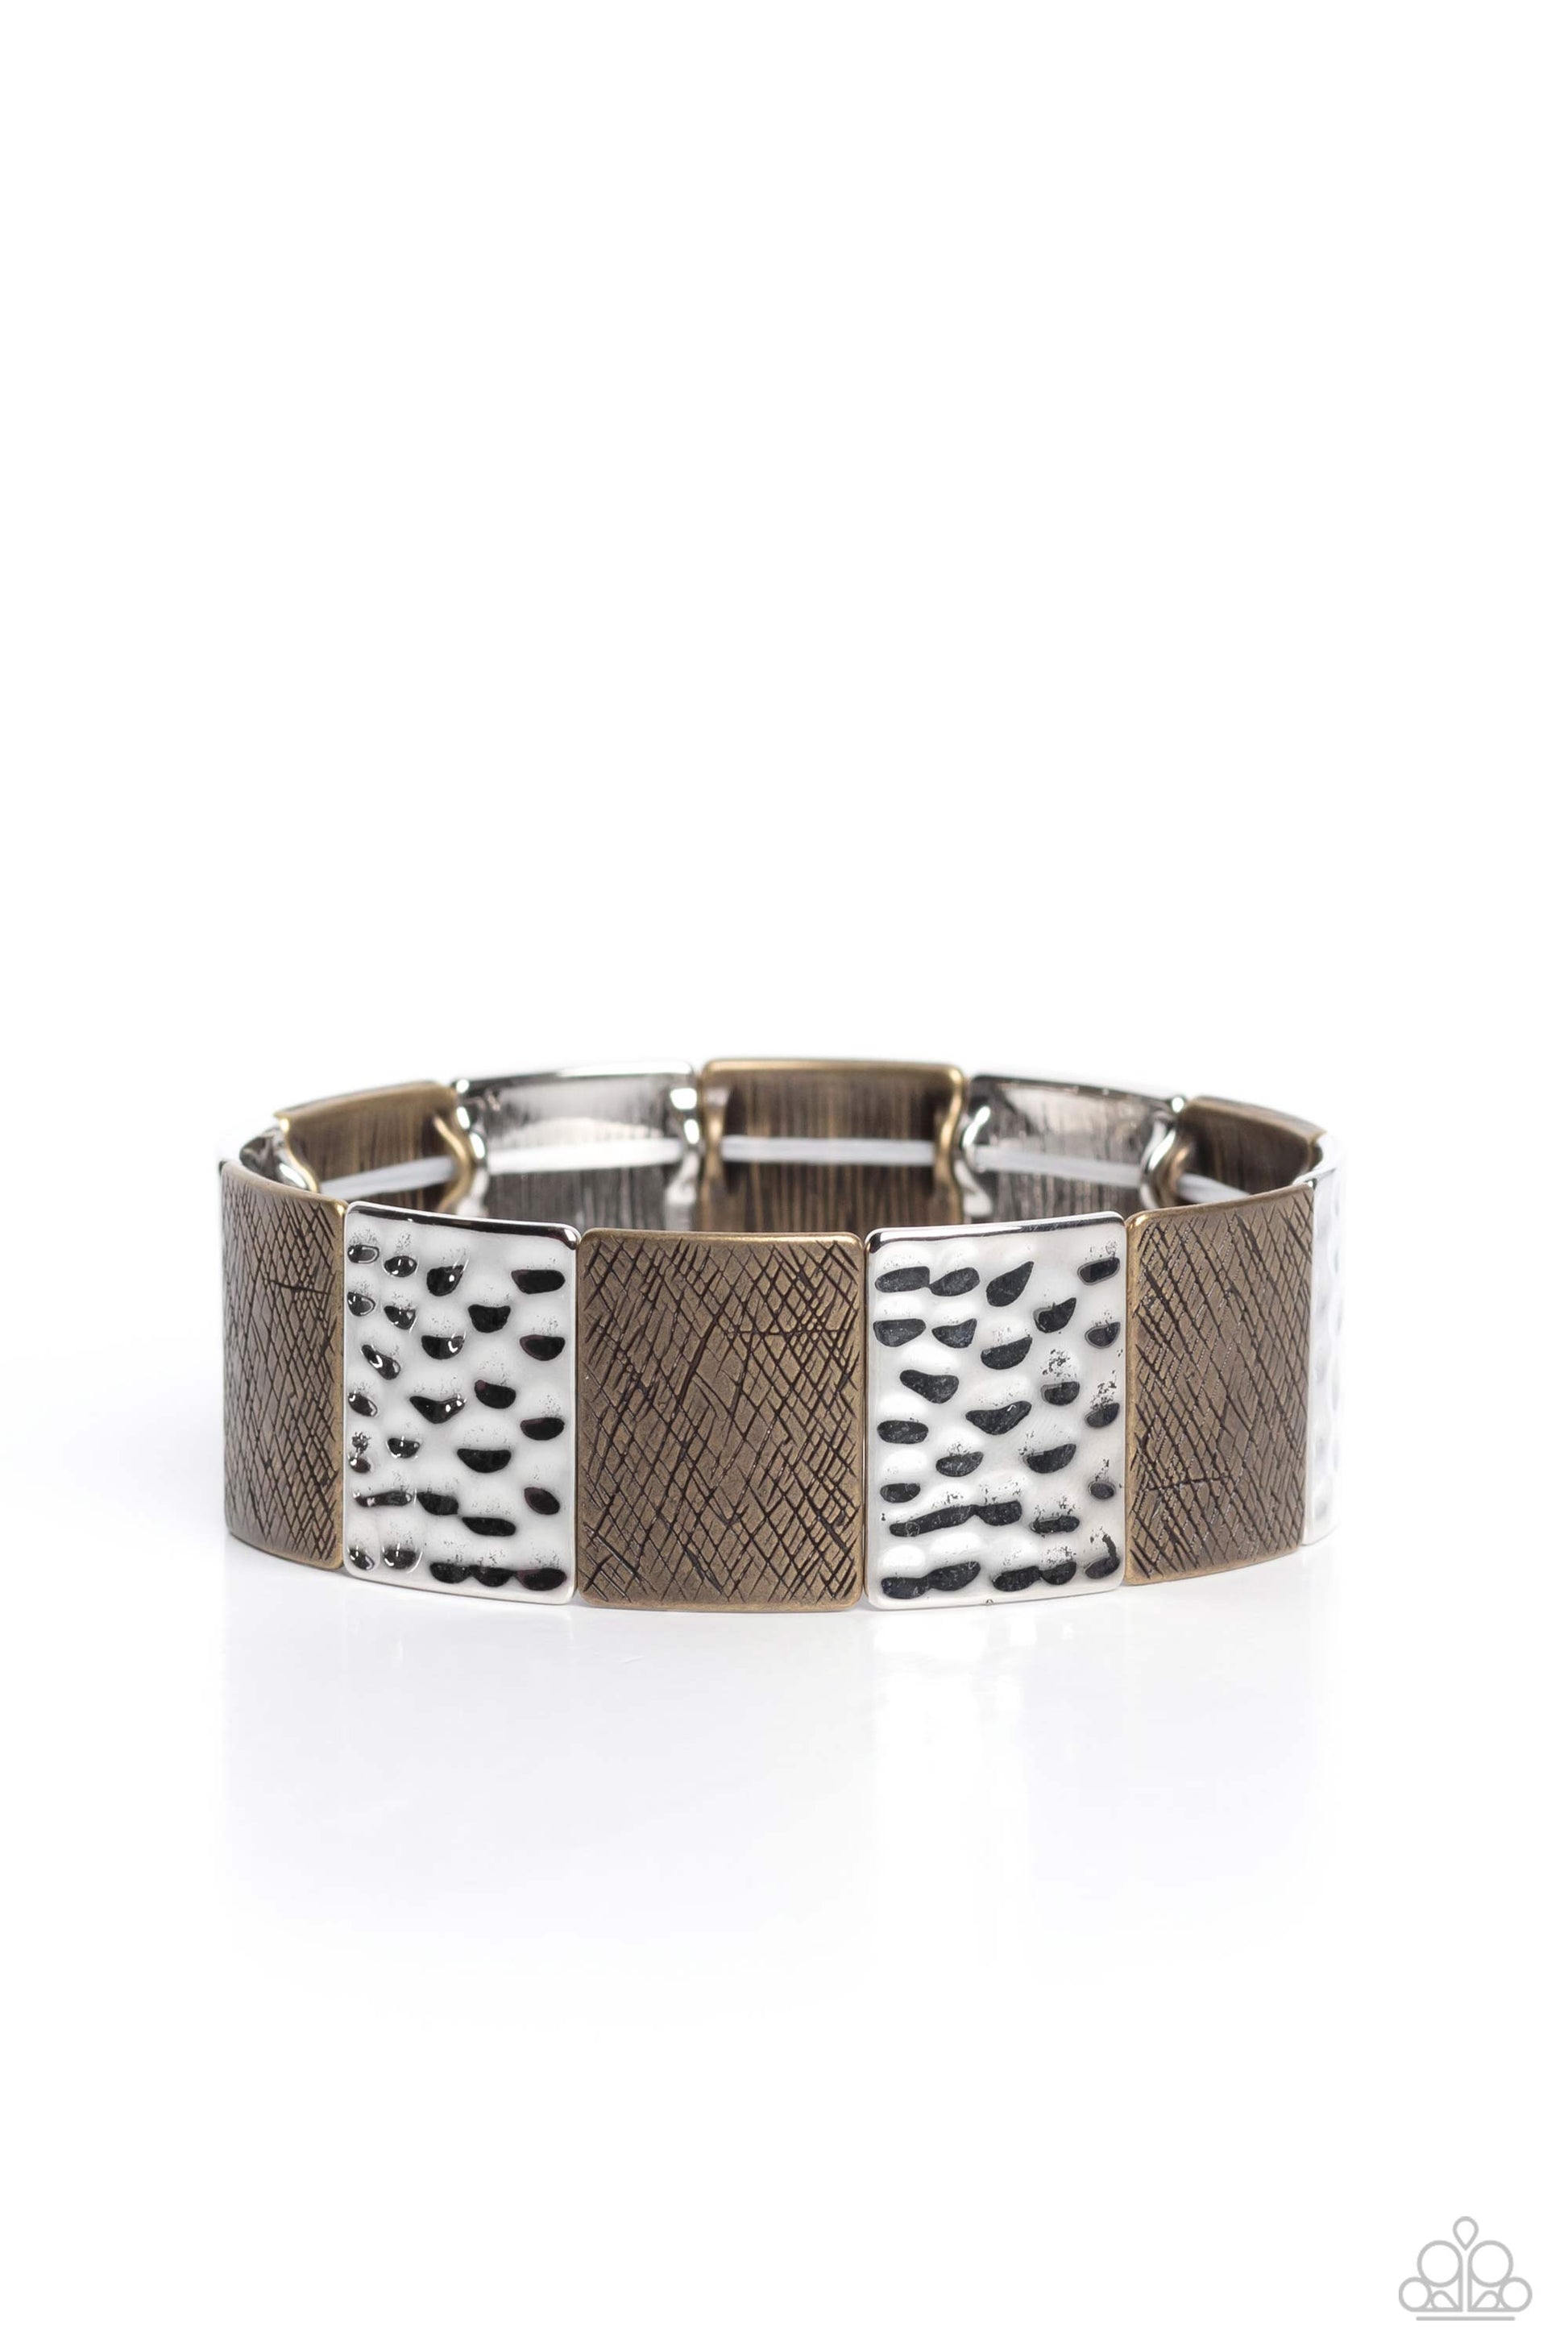 Textured Traveler - Multi Metal Bracelet - Paparazzi Accessories - Silver plates featuring hammered textures and brass plates featuring abstract, stamped, linear textures alternate between one another as they wrap around the wrist on elastic stretchy bands for a dramatic statement piece. Sold as one individual bracelet.